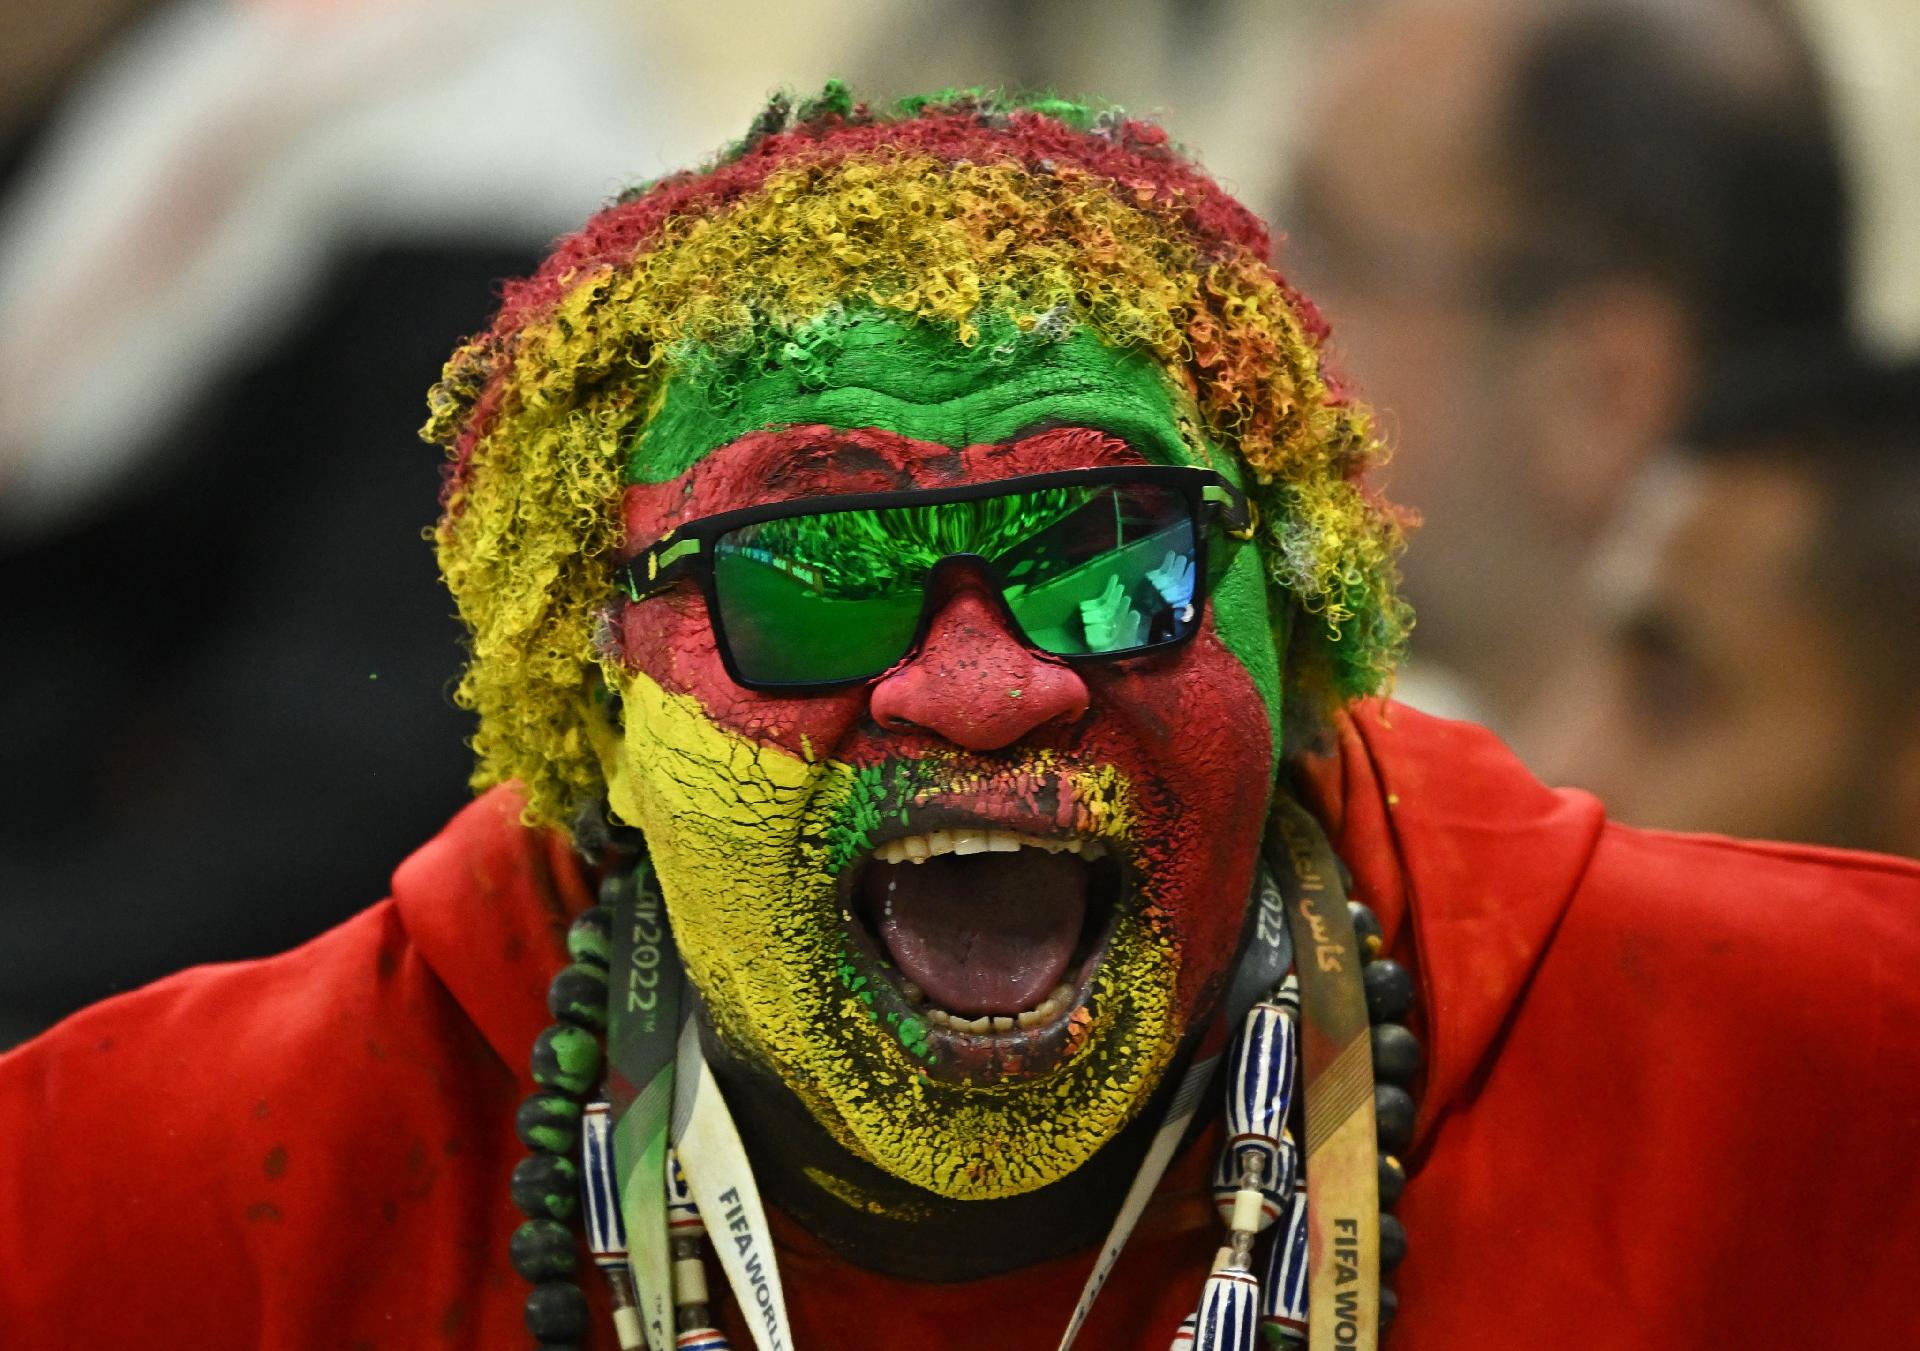 Cameroon fans before the match against Brazil in the World Cup - REUTERS/Dylan Martinez